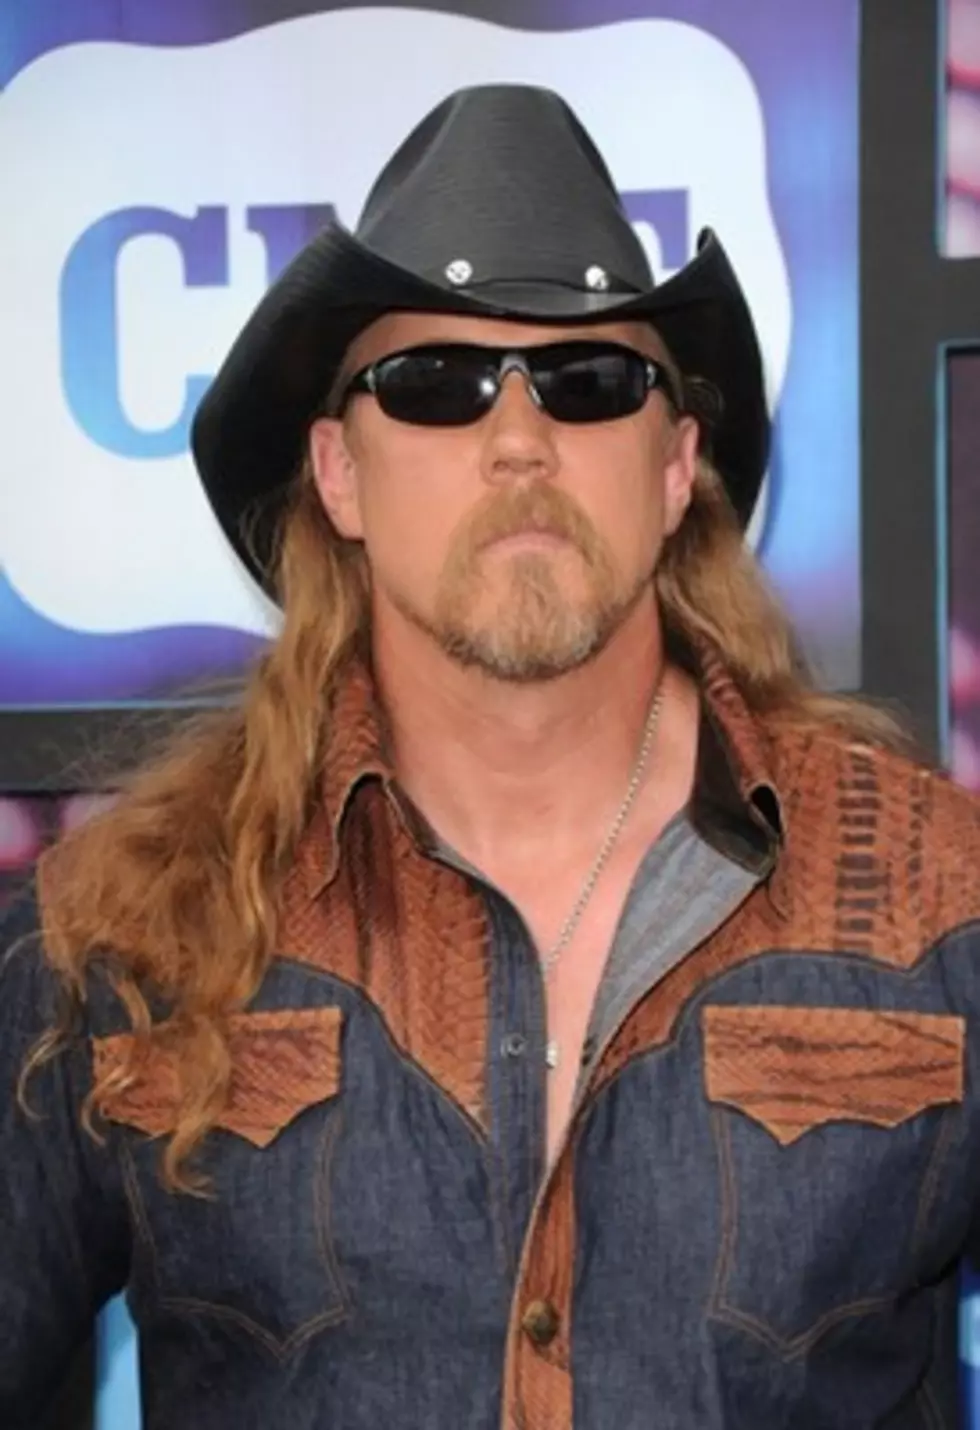 Trace Adkins Voted “Country’s Sexiest Man”